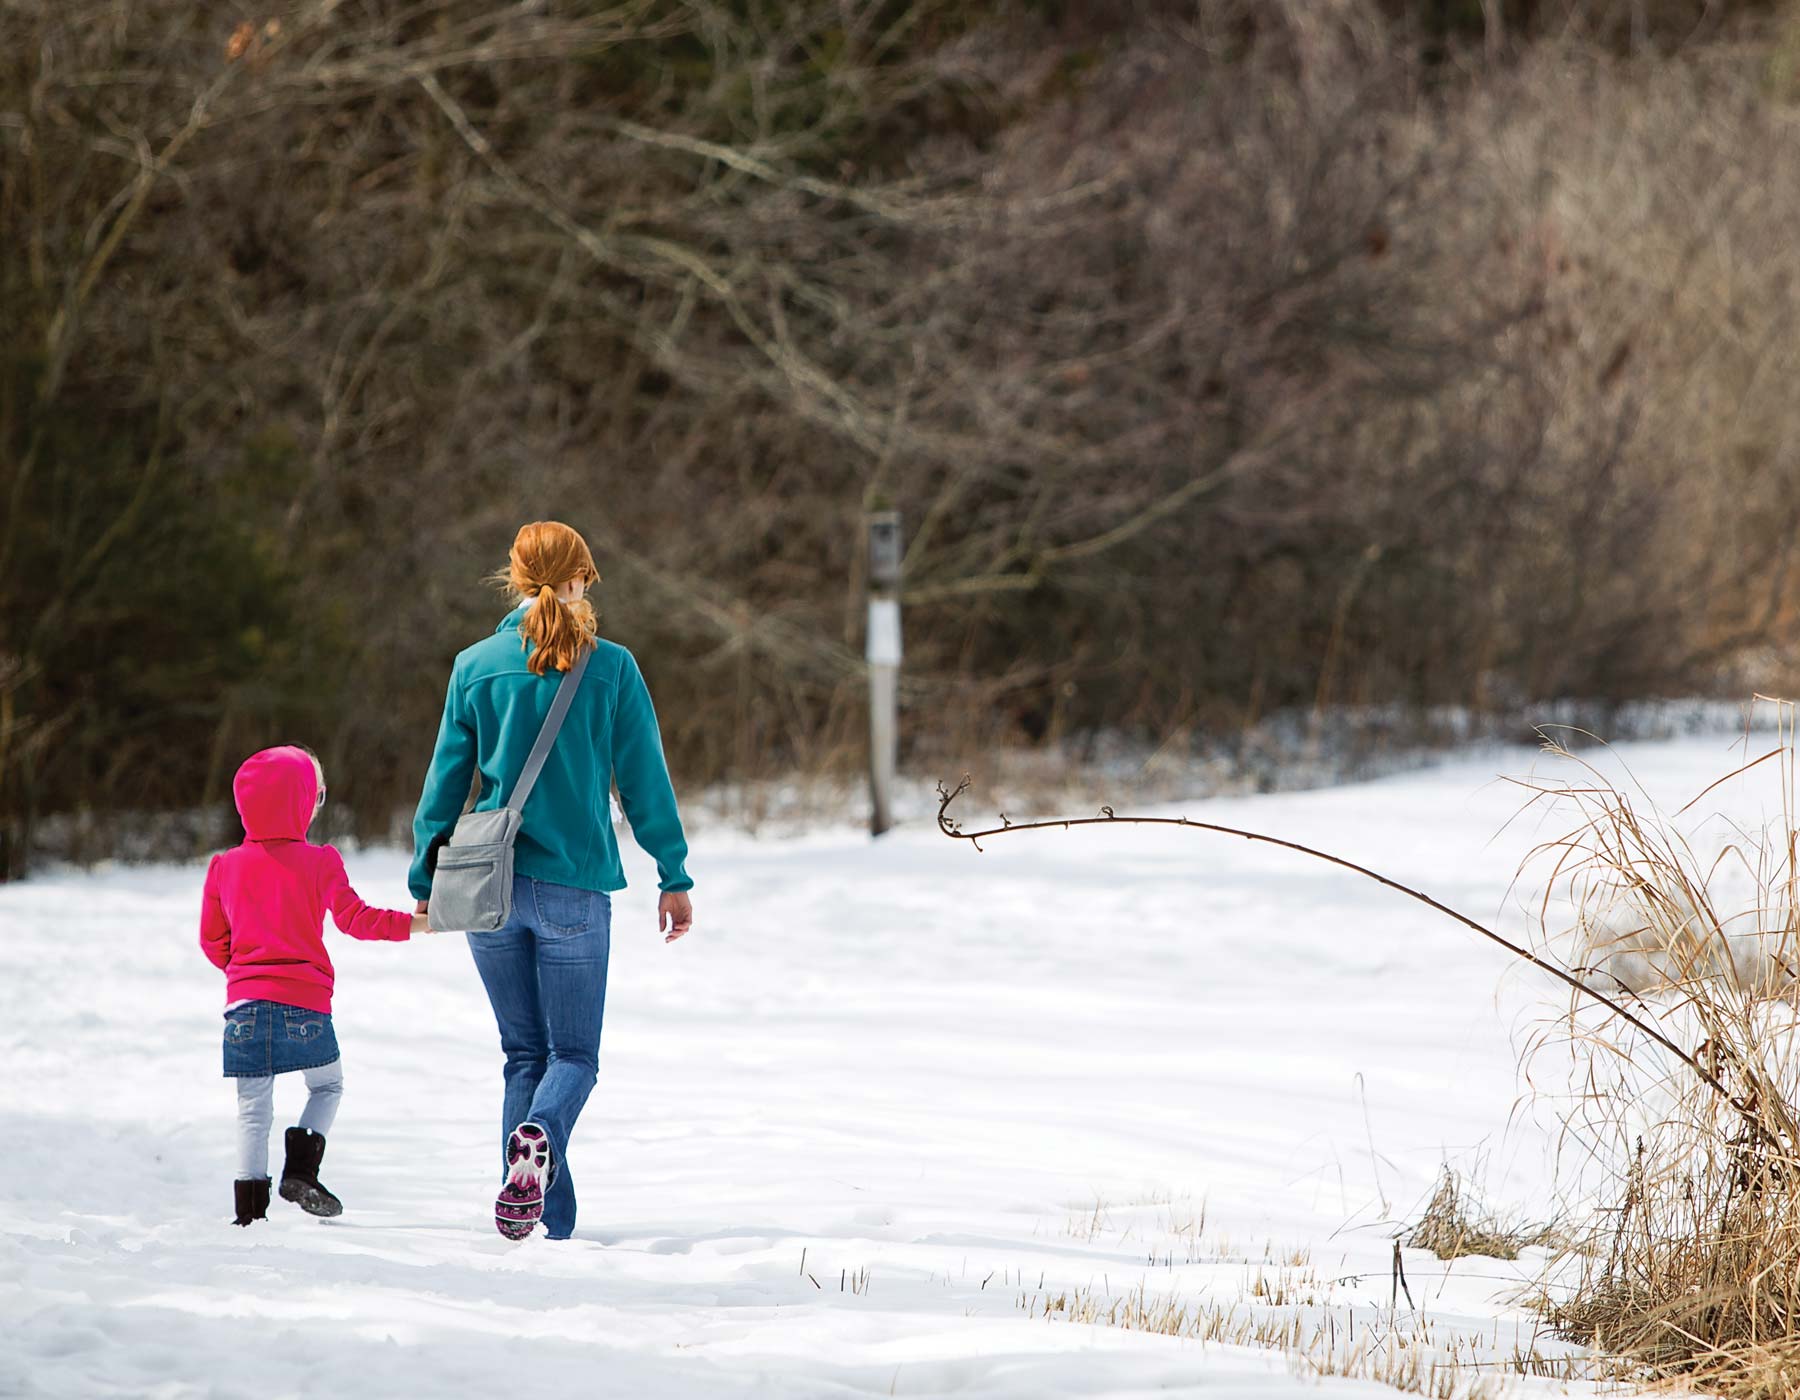 A woman and child take a winter walk on a snowy path